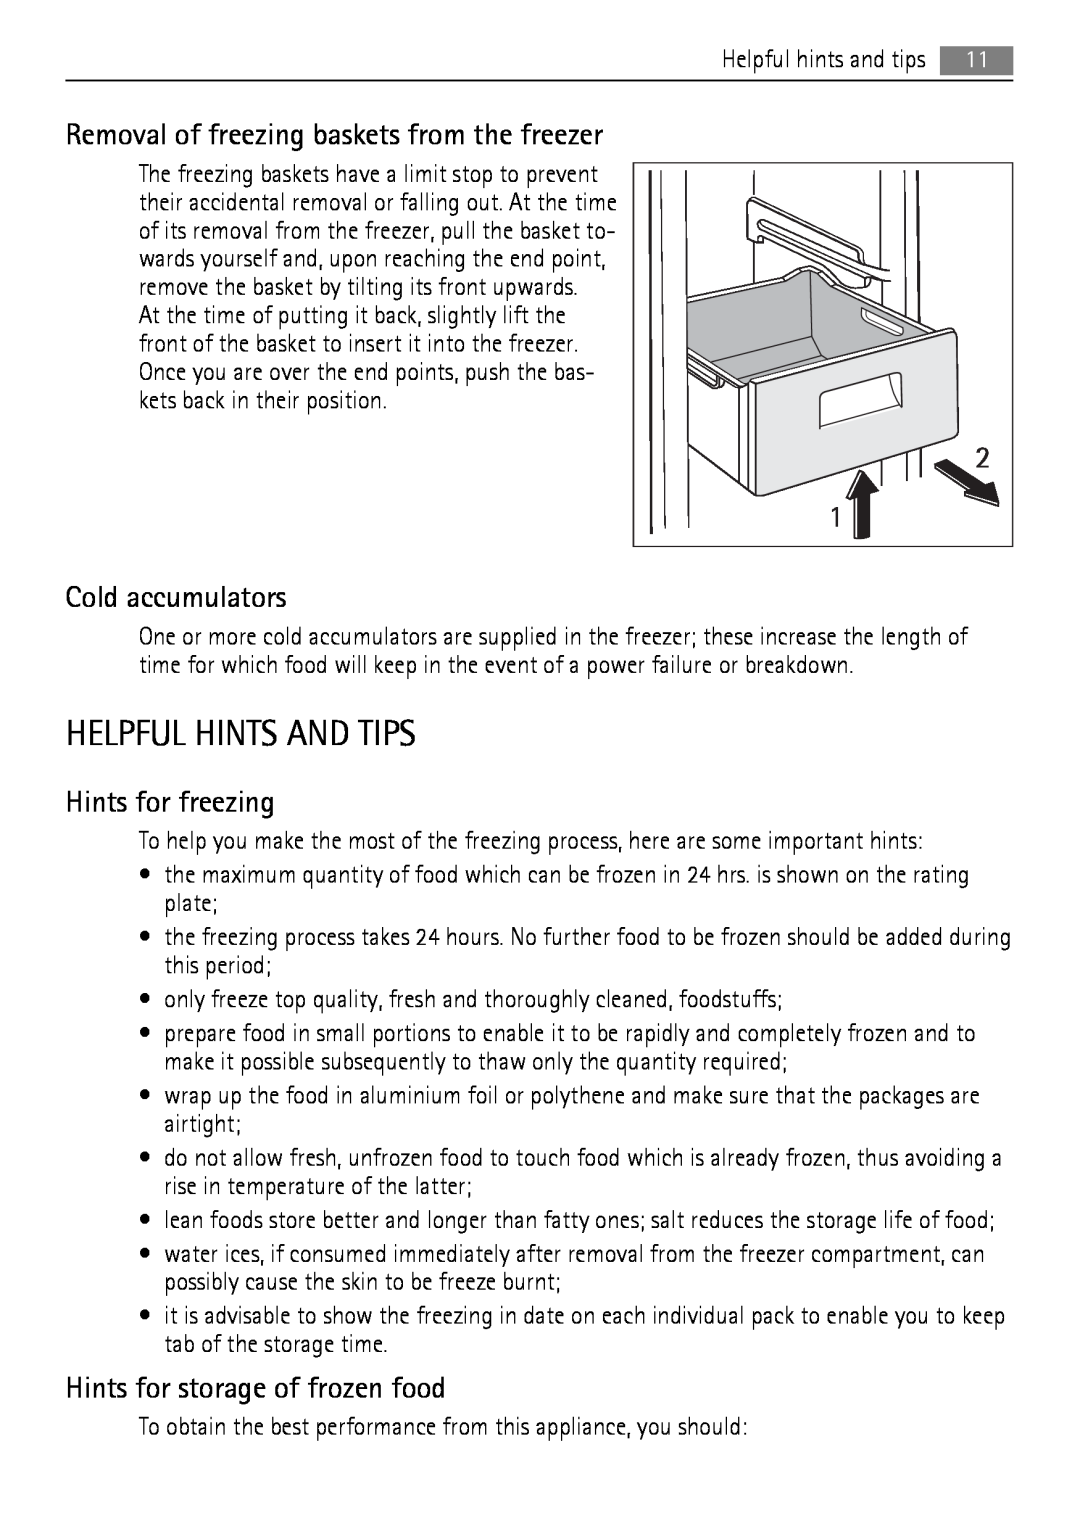 AEG AGN2451, AGN2901 Helpful Hints And Tips, Cold accumulators, Hints for freezing, Hints for storage of frozen food 